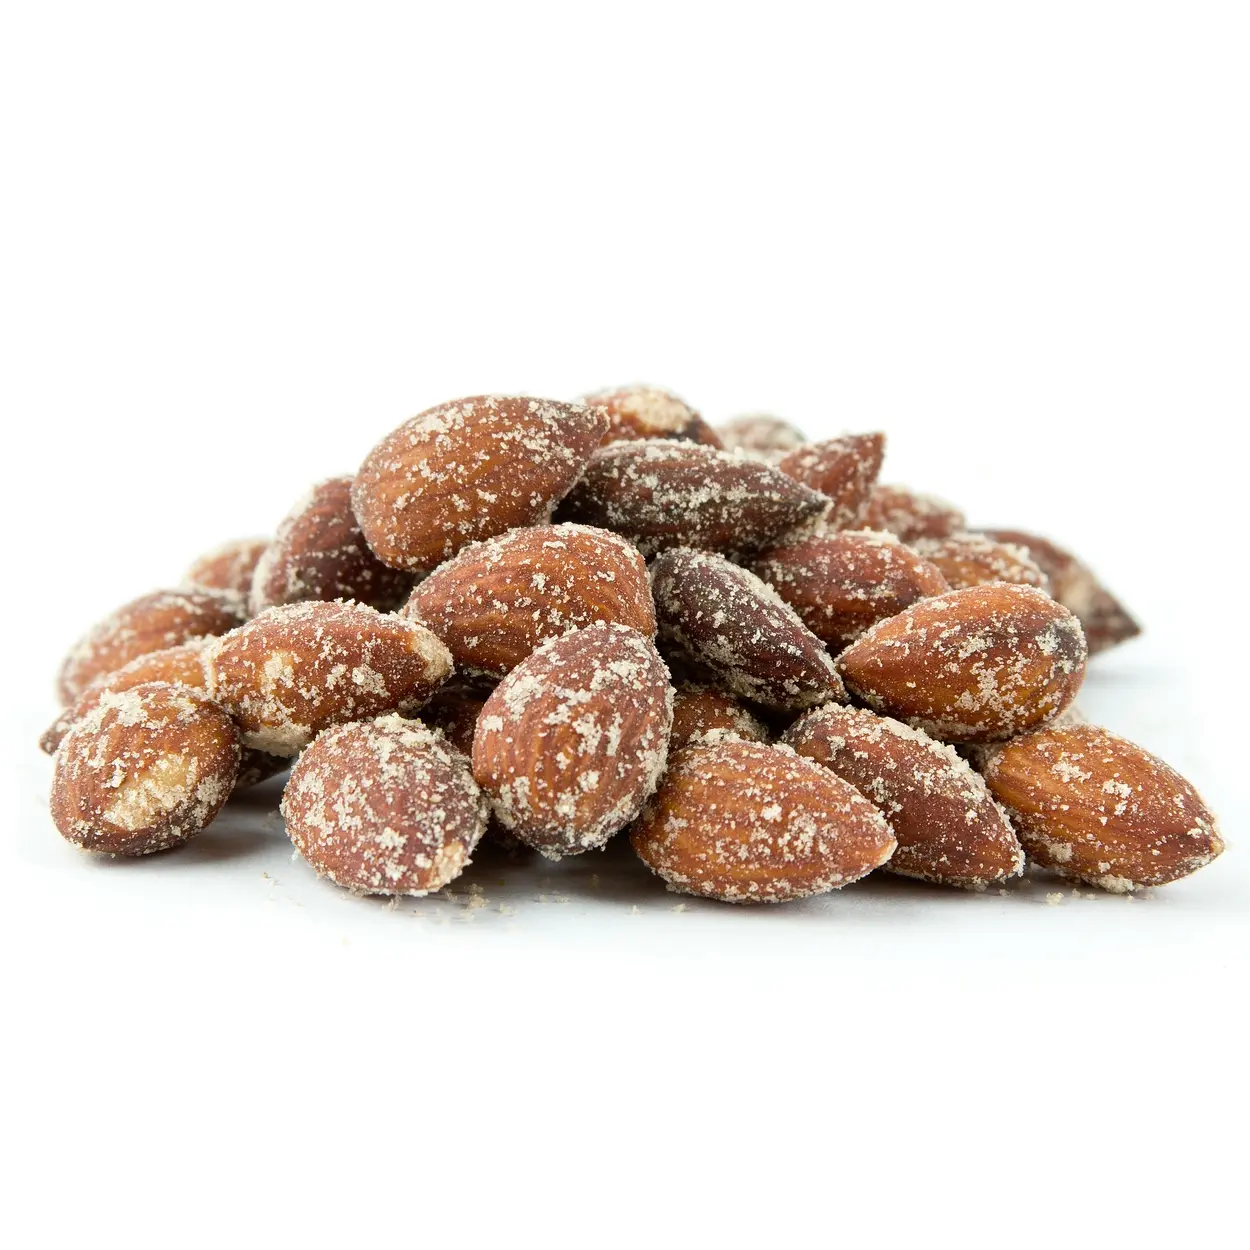 hickory smoked nuts - Can you smoke food with hickory nuts